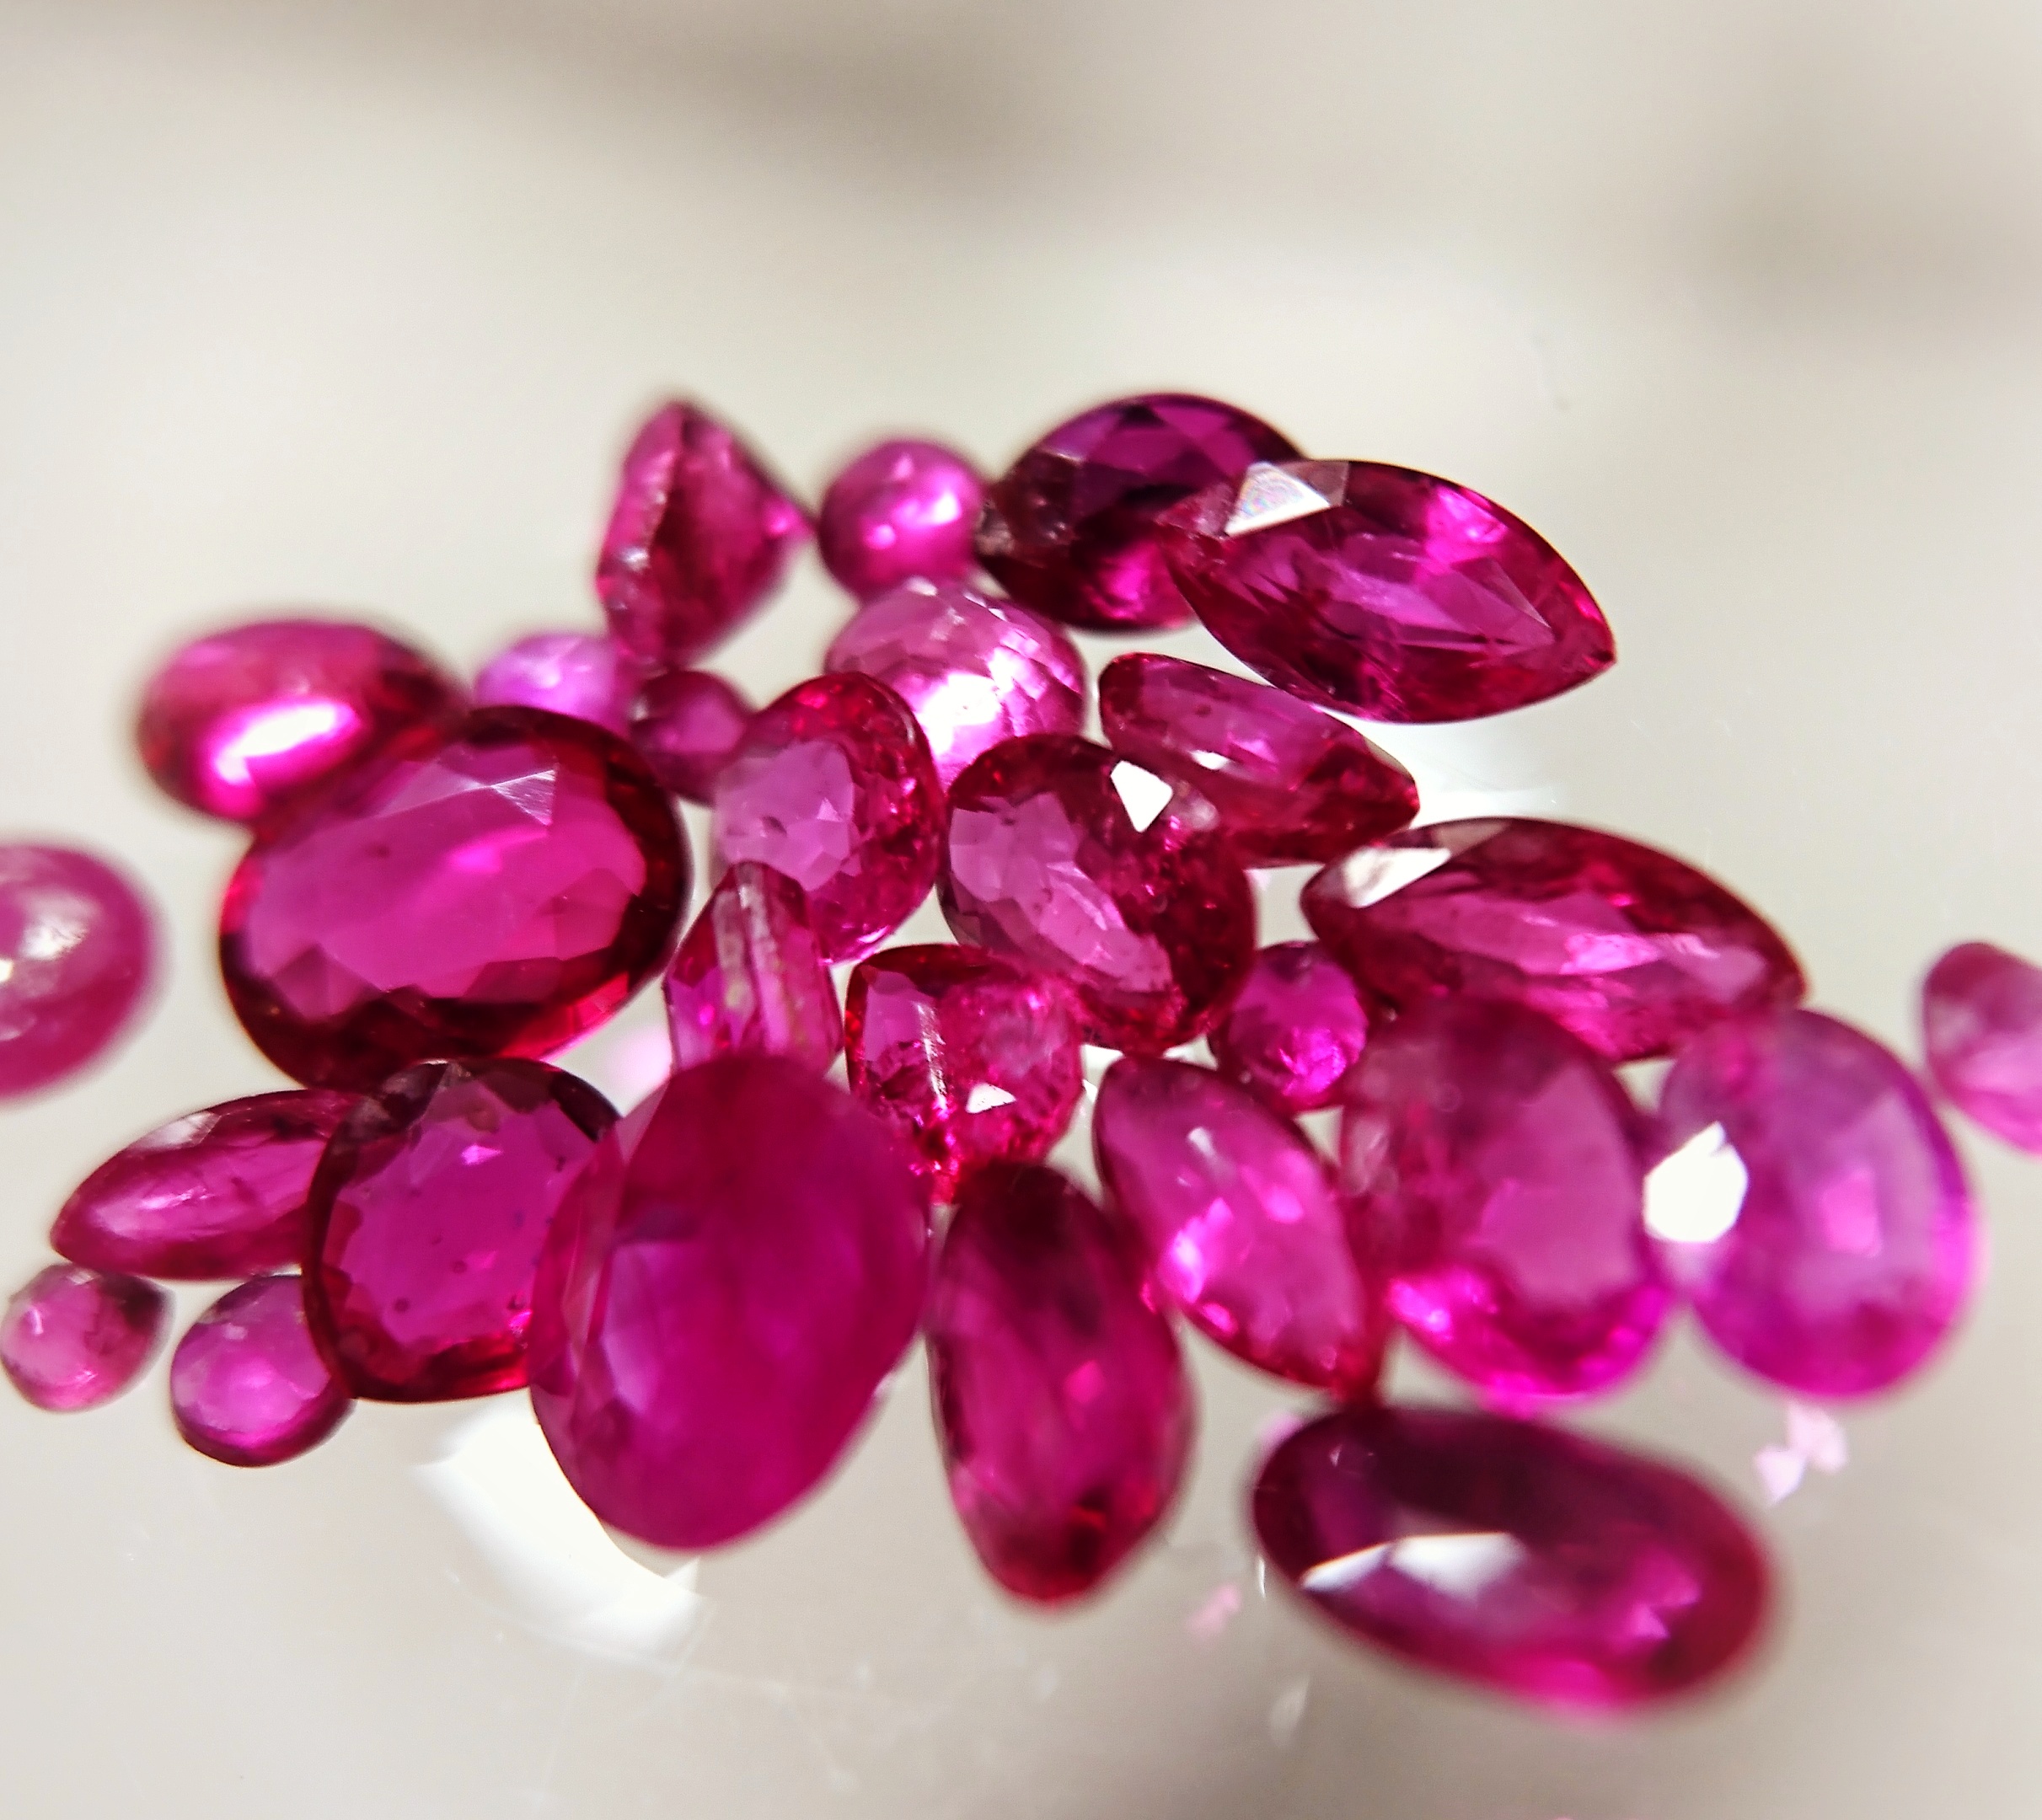 Pink Gemstones: A Vibrant Collection of Precious Stones